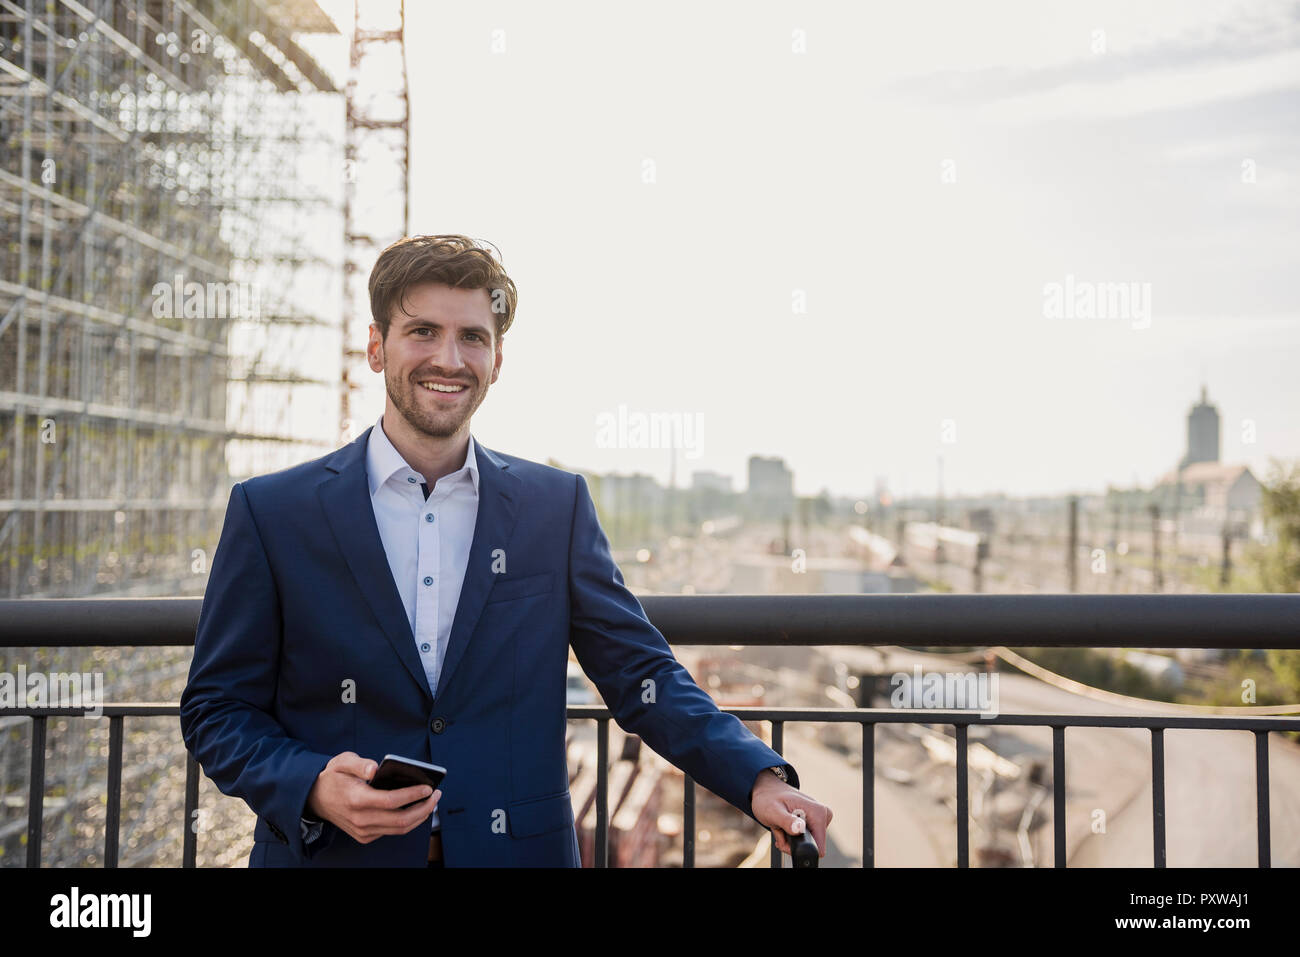 Portrait of smiling businessman standing on bridge in the city holding cell phone Stock Photo